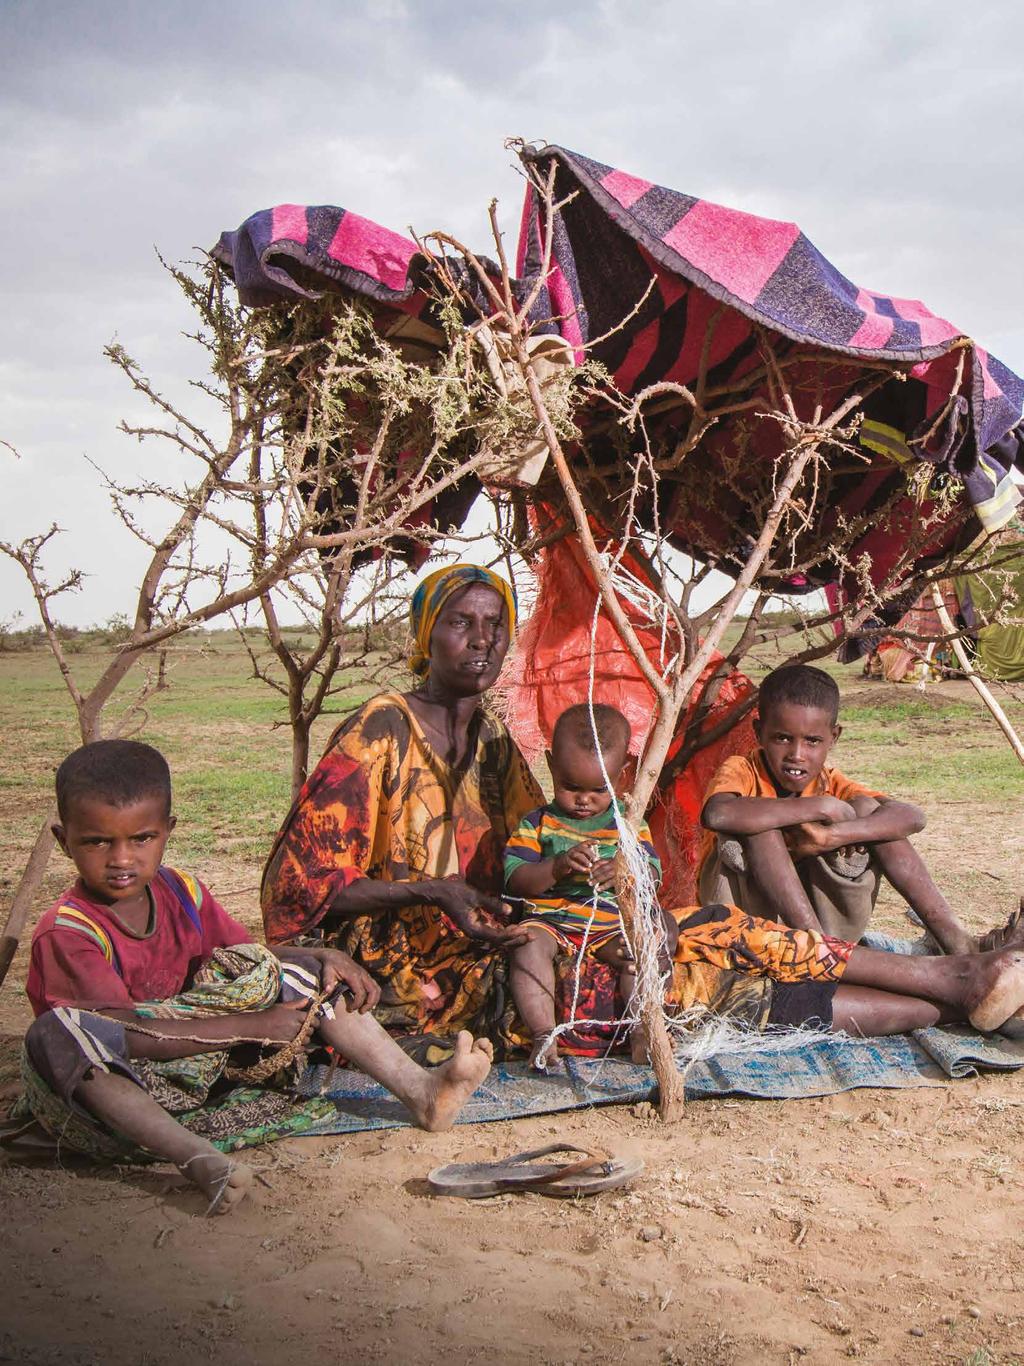 internally displaced persons Somalia. Families affected by prolonged drought.